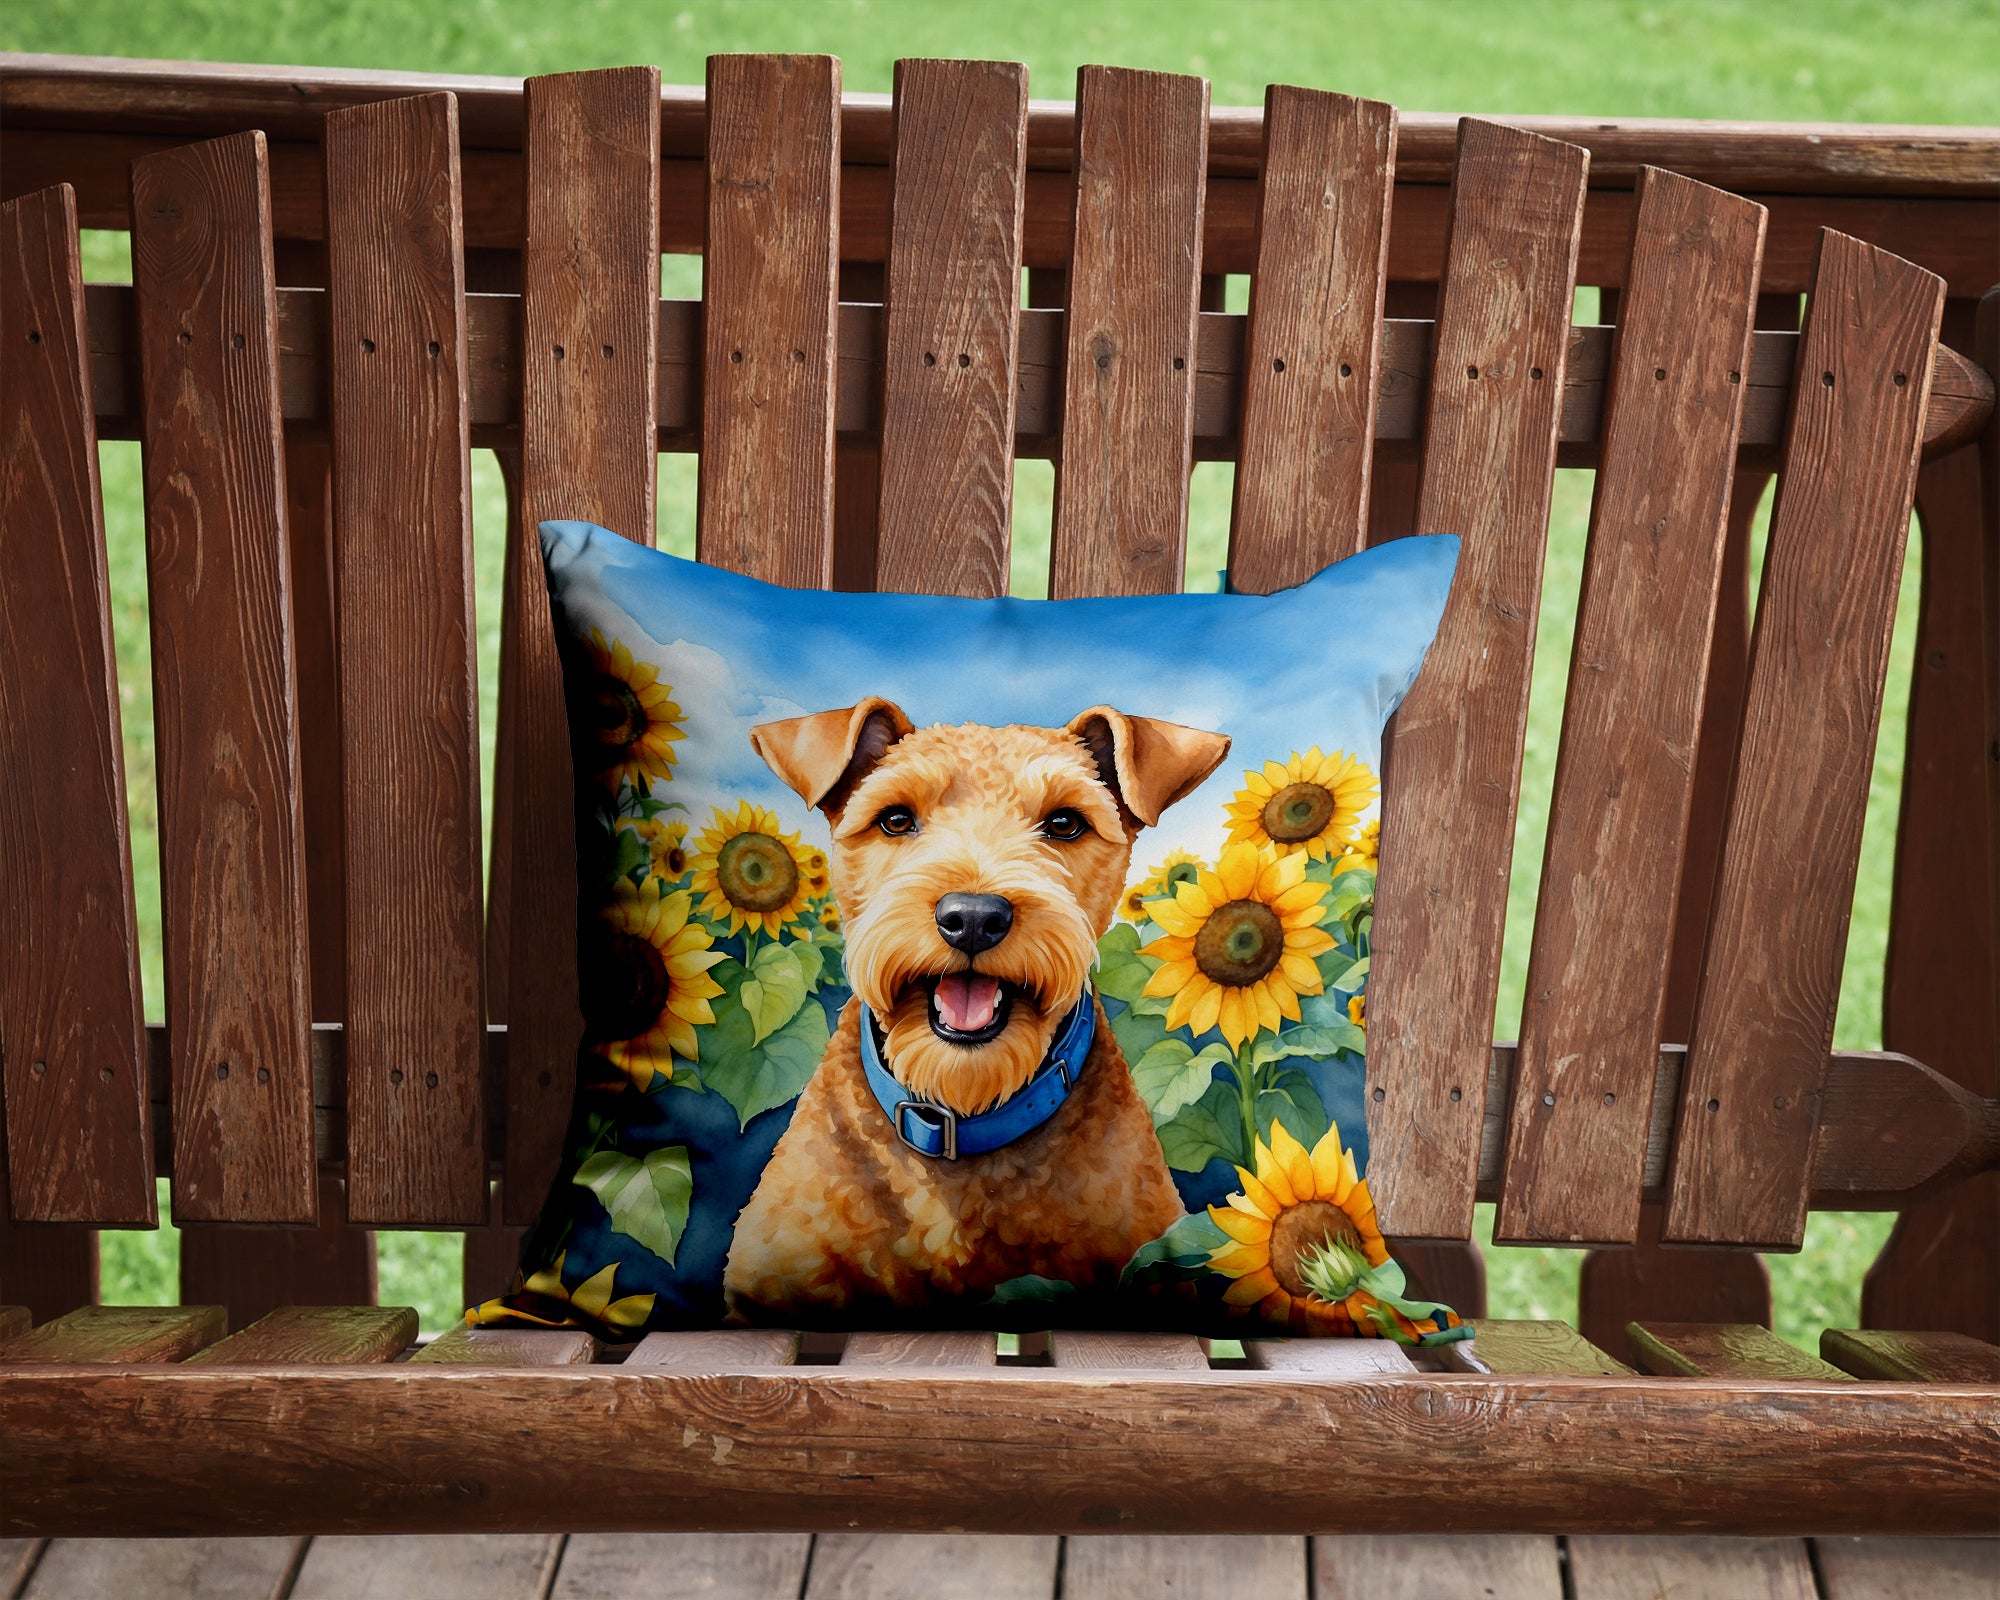 Buy this Lakeland Terrier in Sunflowers Throw Pillow